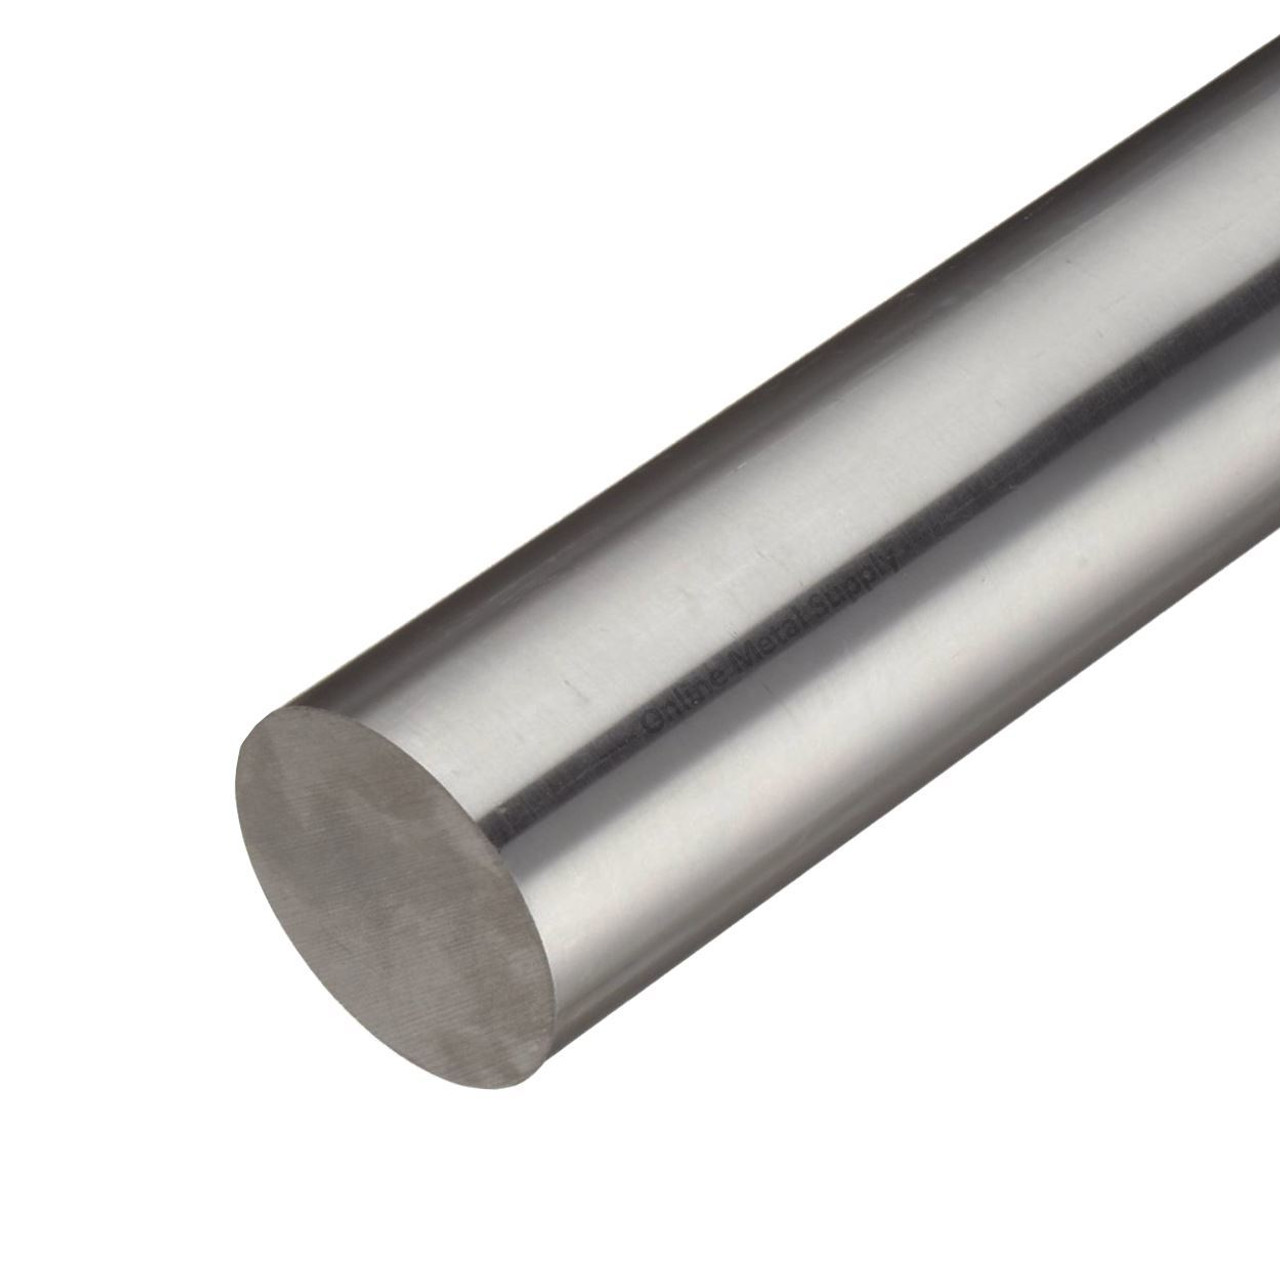 3.000 (3 inch) x 4 inches, 17-4 Cond A Stainless Steel Round Rod, Cold Finished